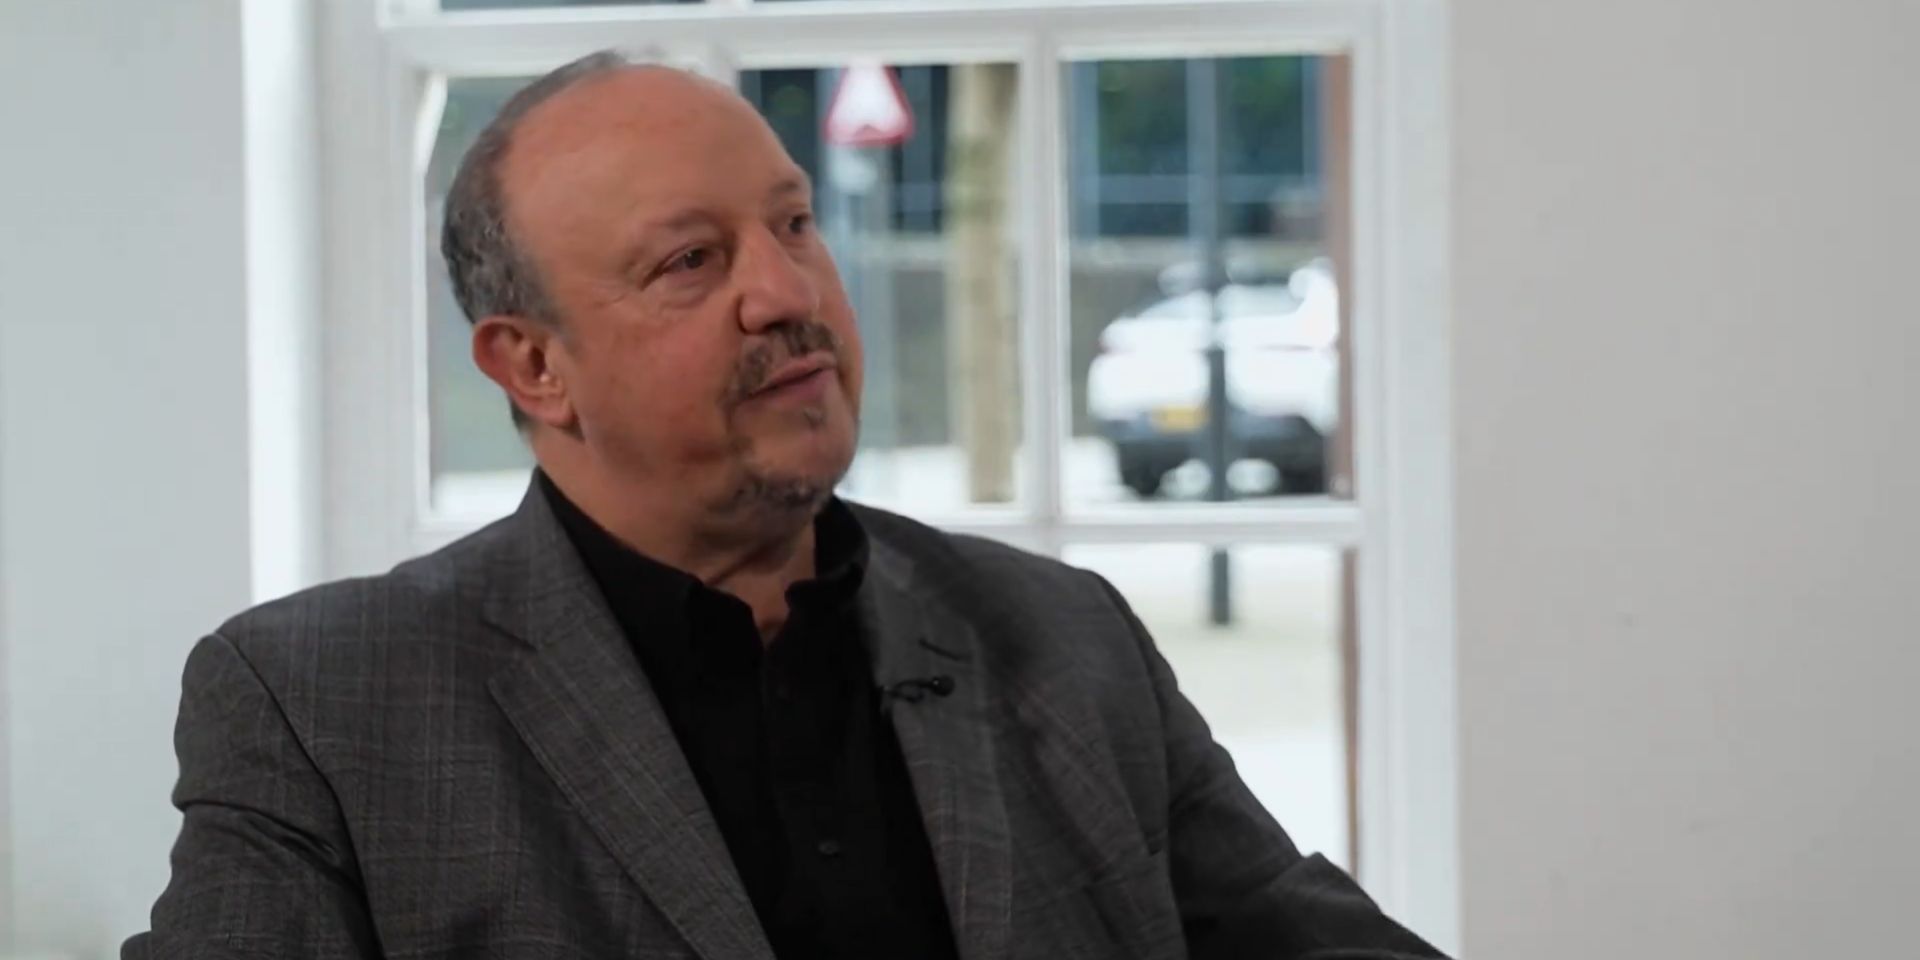 (Video) Rafa Benitez on what Liverpool ‘need’ from the next manager after Klopp